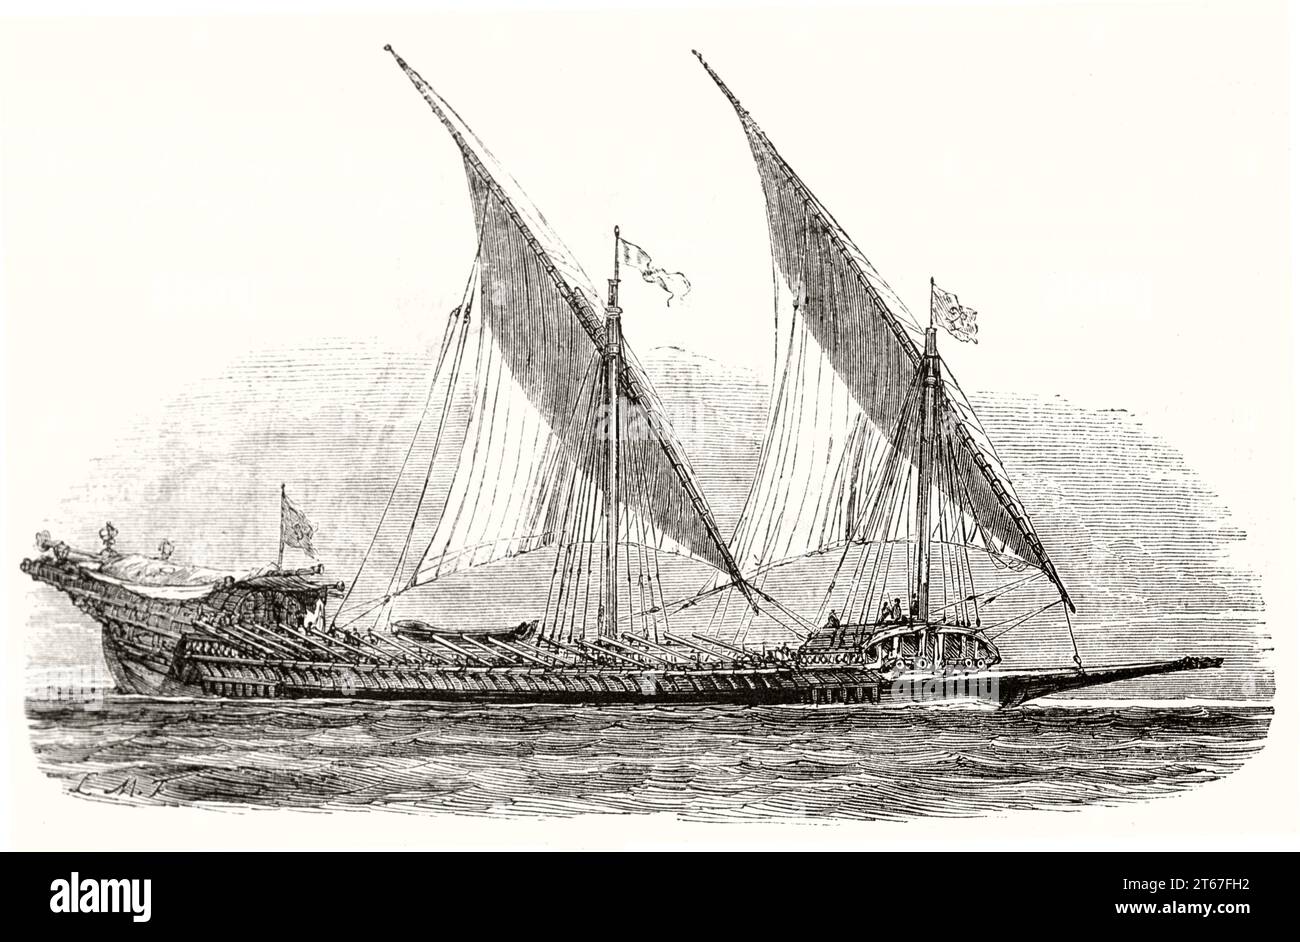 Old vessel illustration: 17th century Galley. By Morel-Fatio,  publ. on Magasin Pittoresque, Paris, 1851 Stock Photo